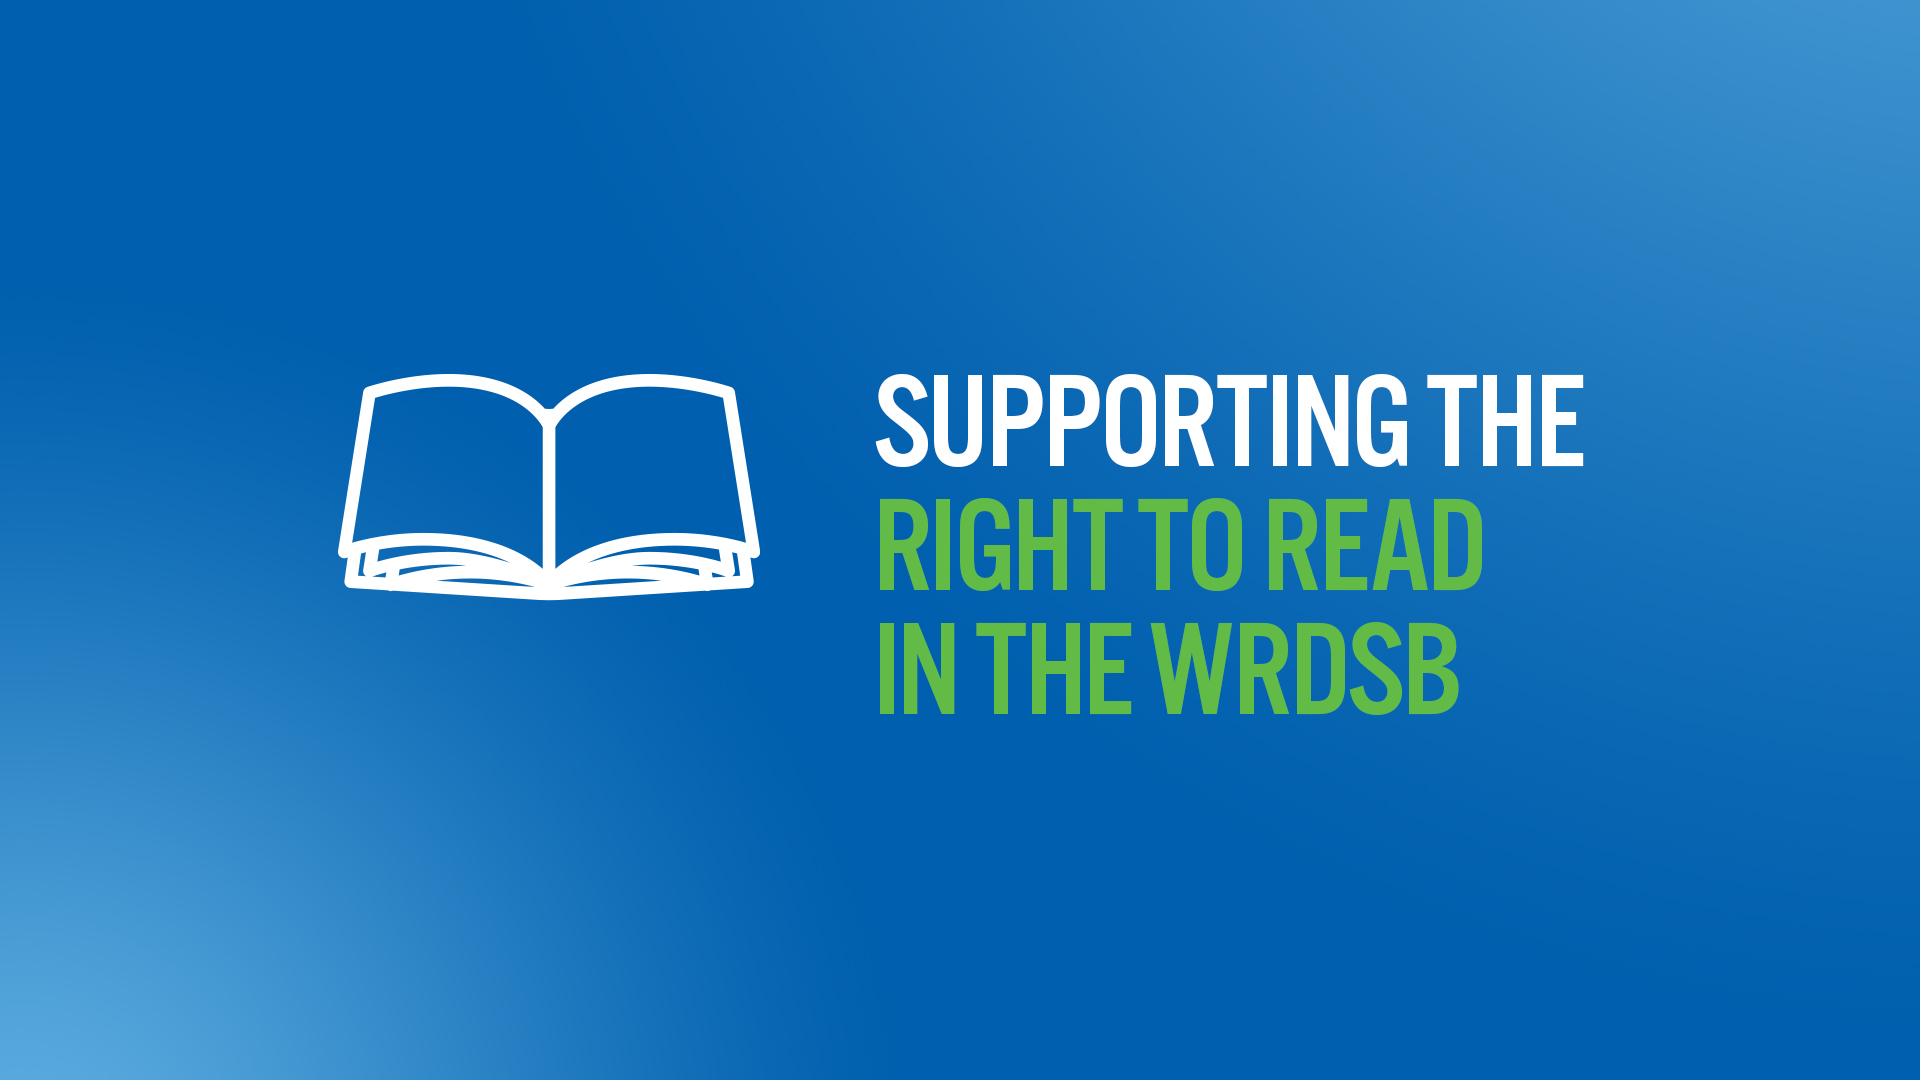 Supporting the Right to Read in the WRDSB